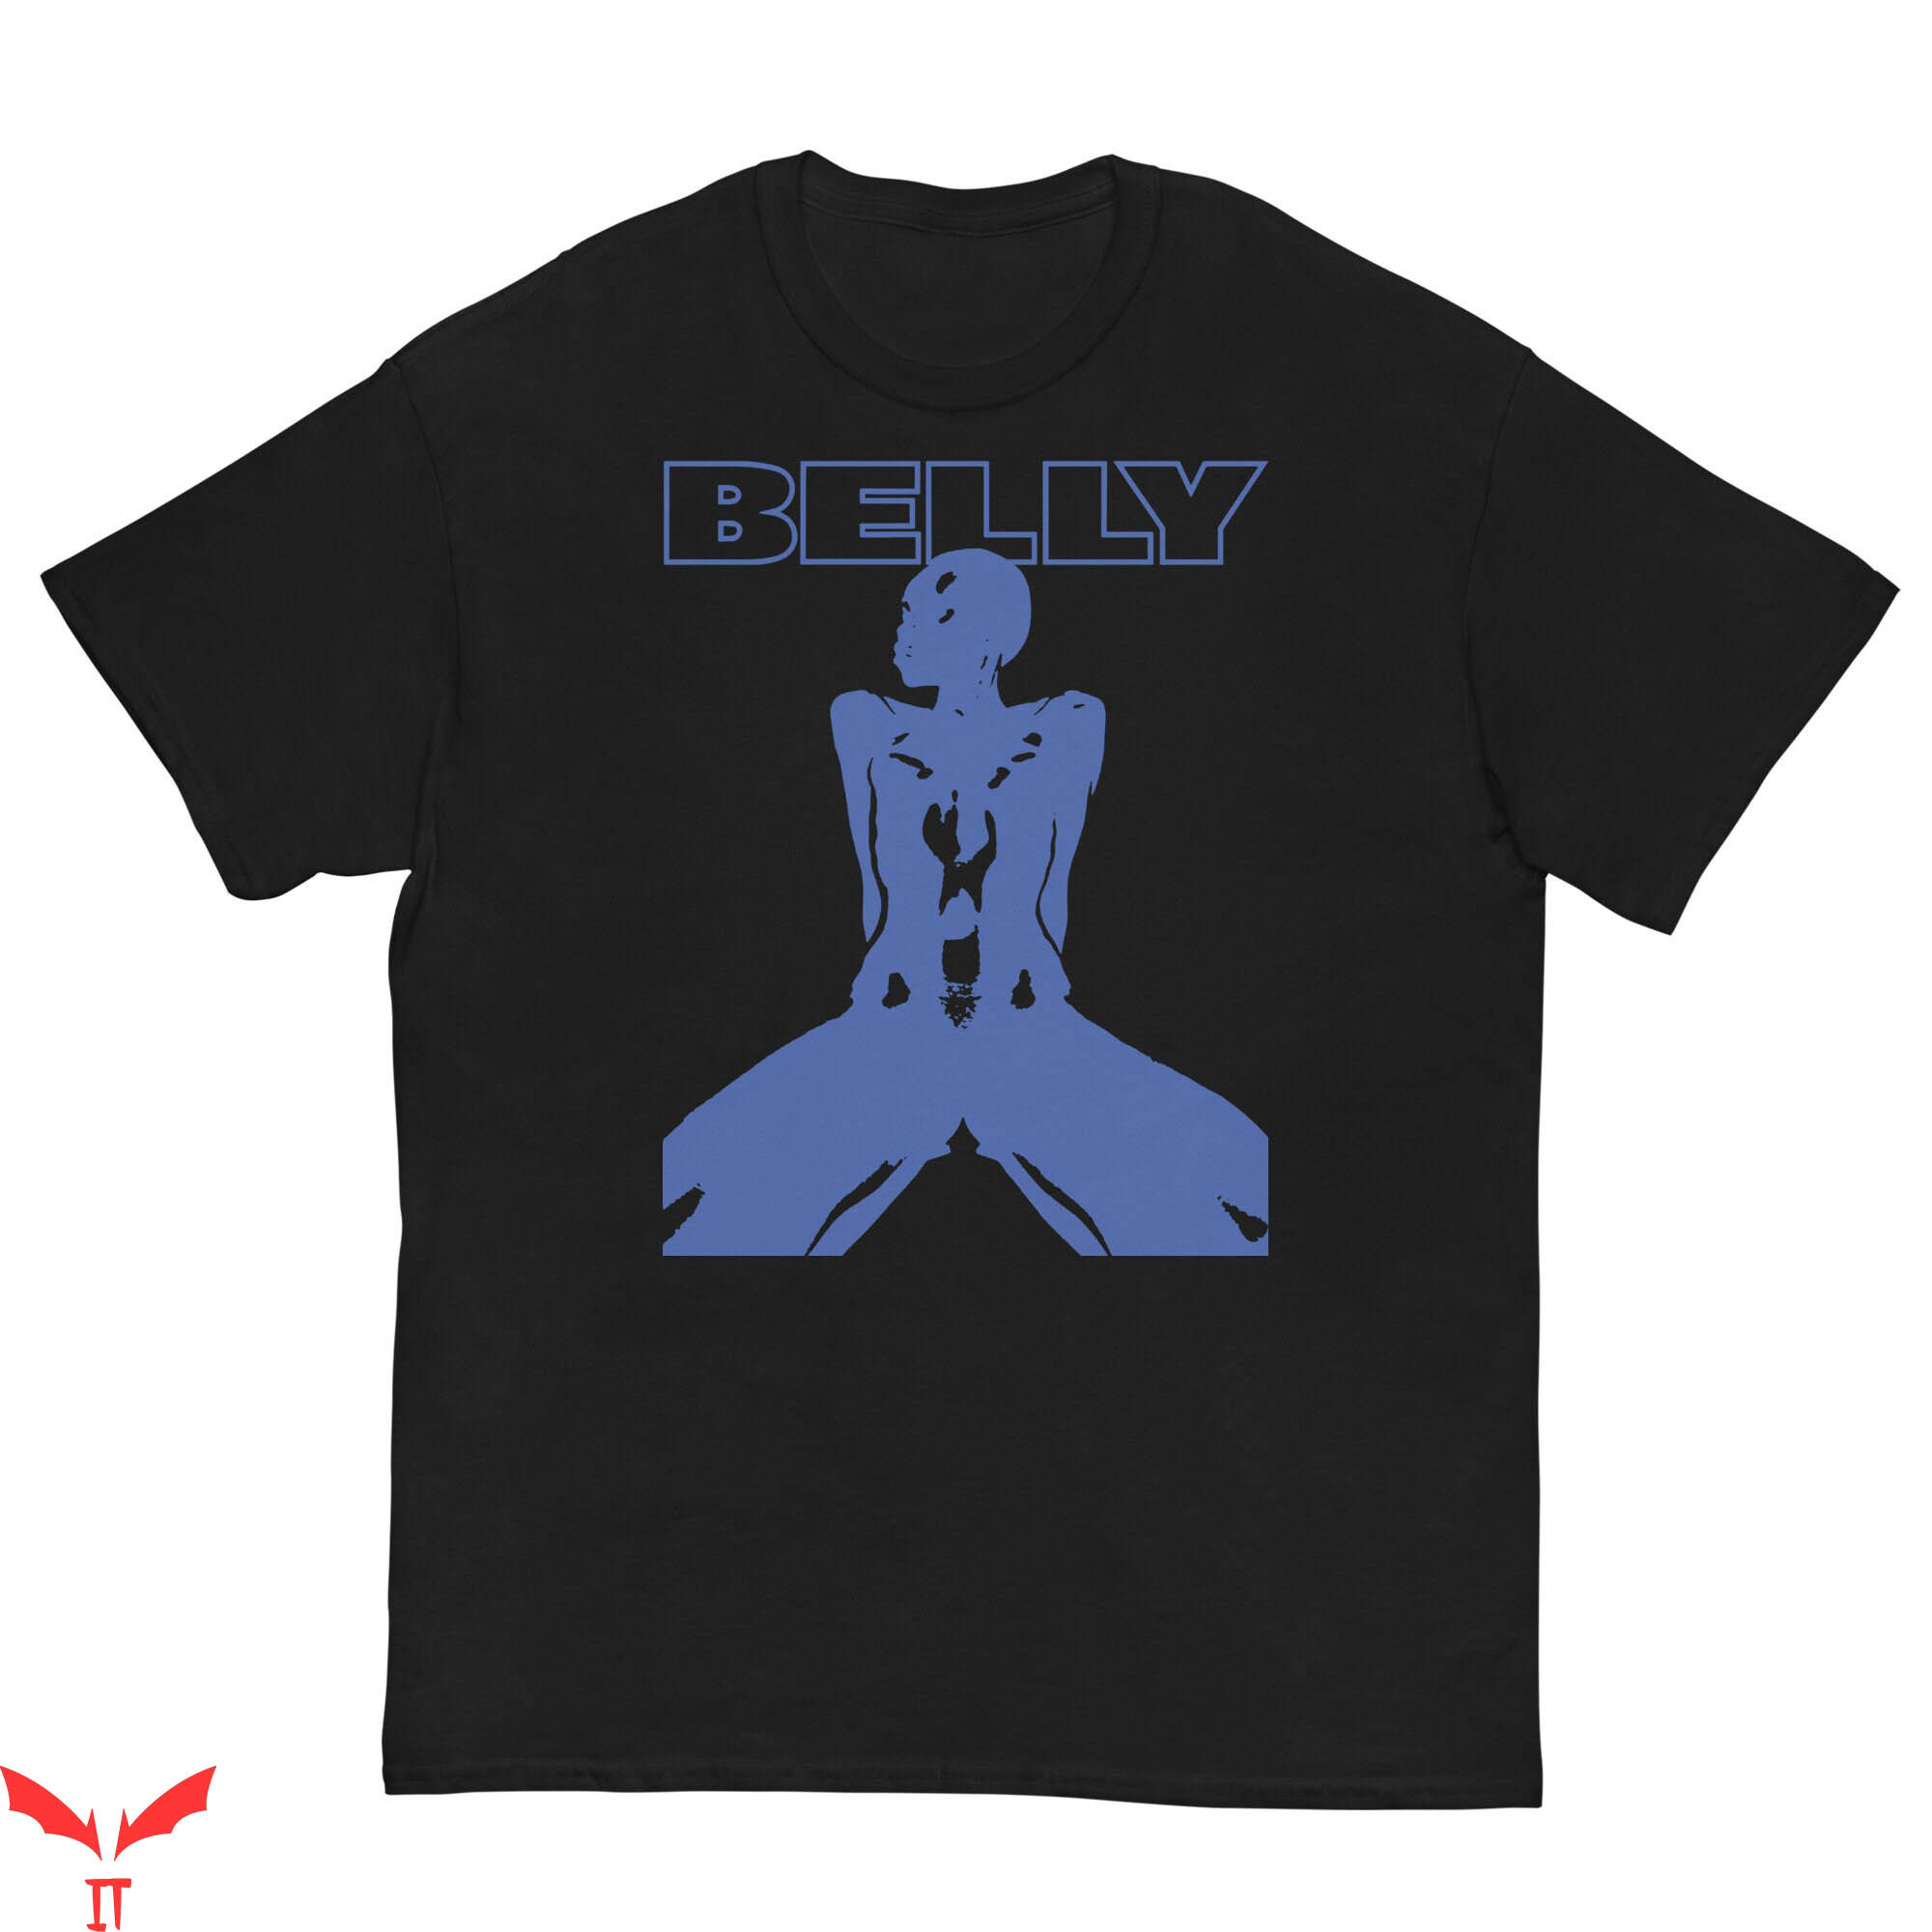 Belly Movie T-Shirt Belly Vintage Hip Hop Movie Poster Shirt